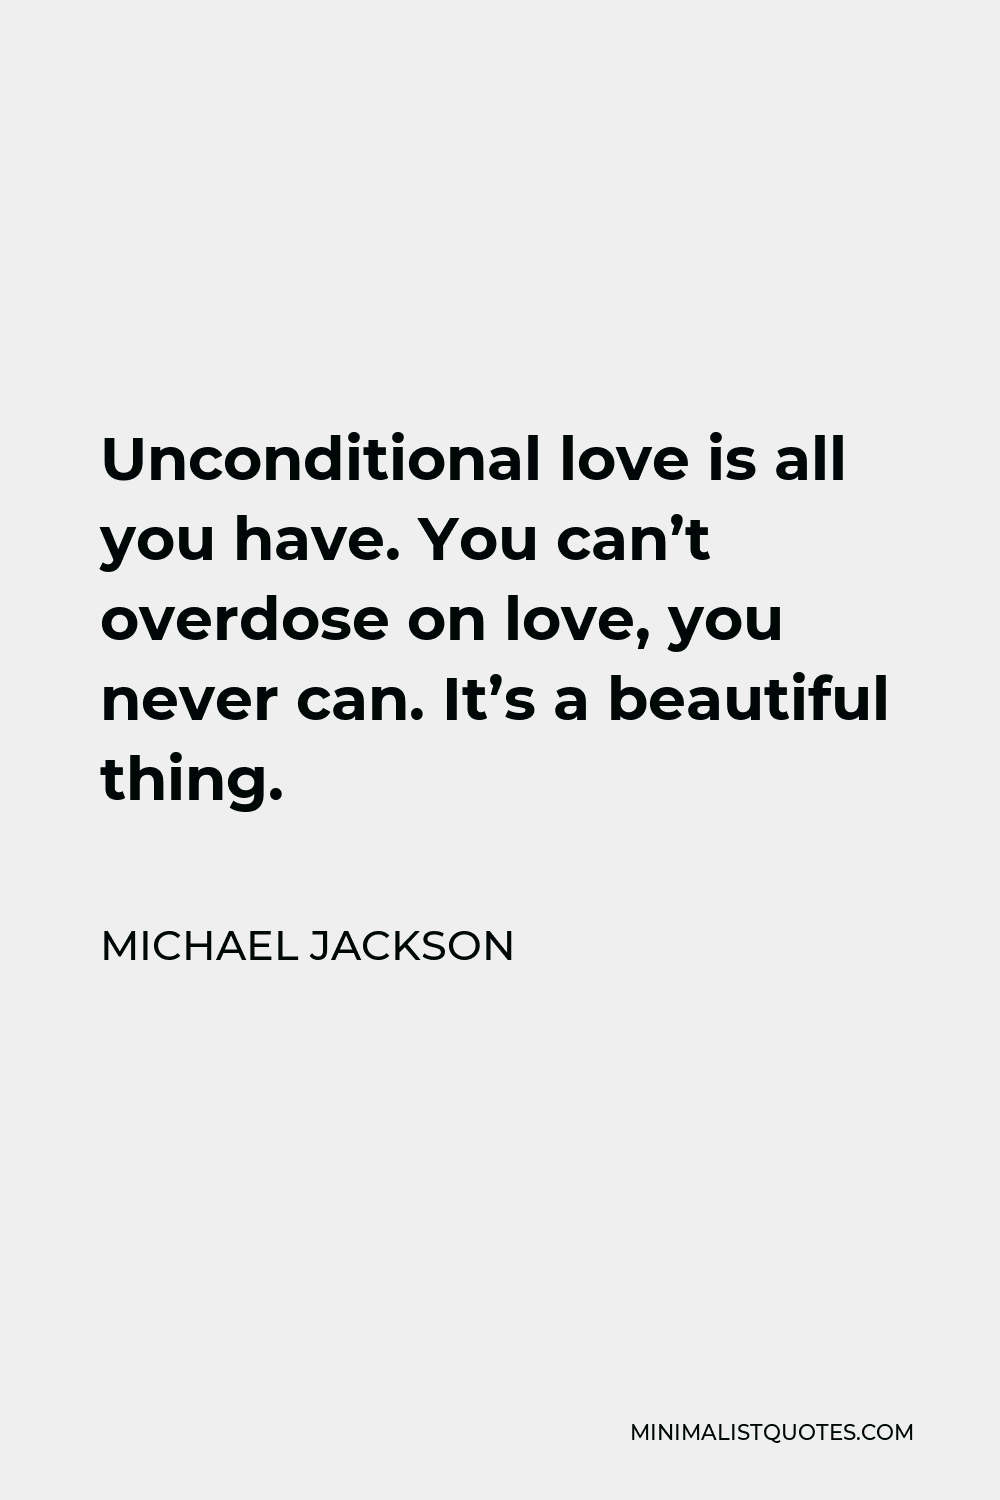 Michael Jackson Quote - Unconditional love is all you have. You can’t overdose on love, you never can. It’s a beautiful thing.